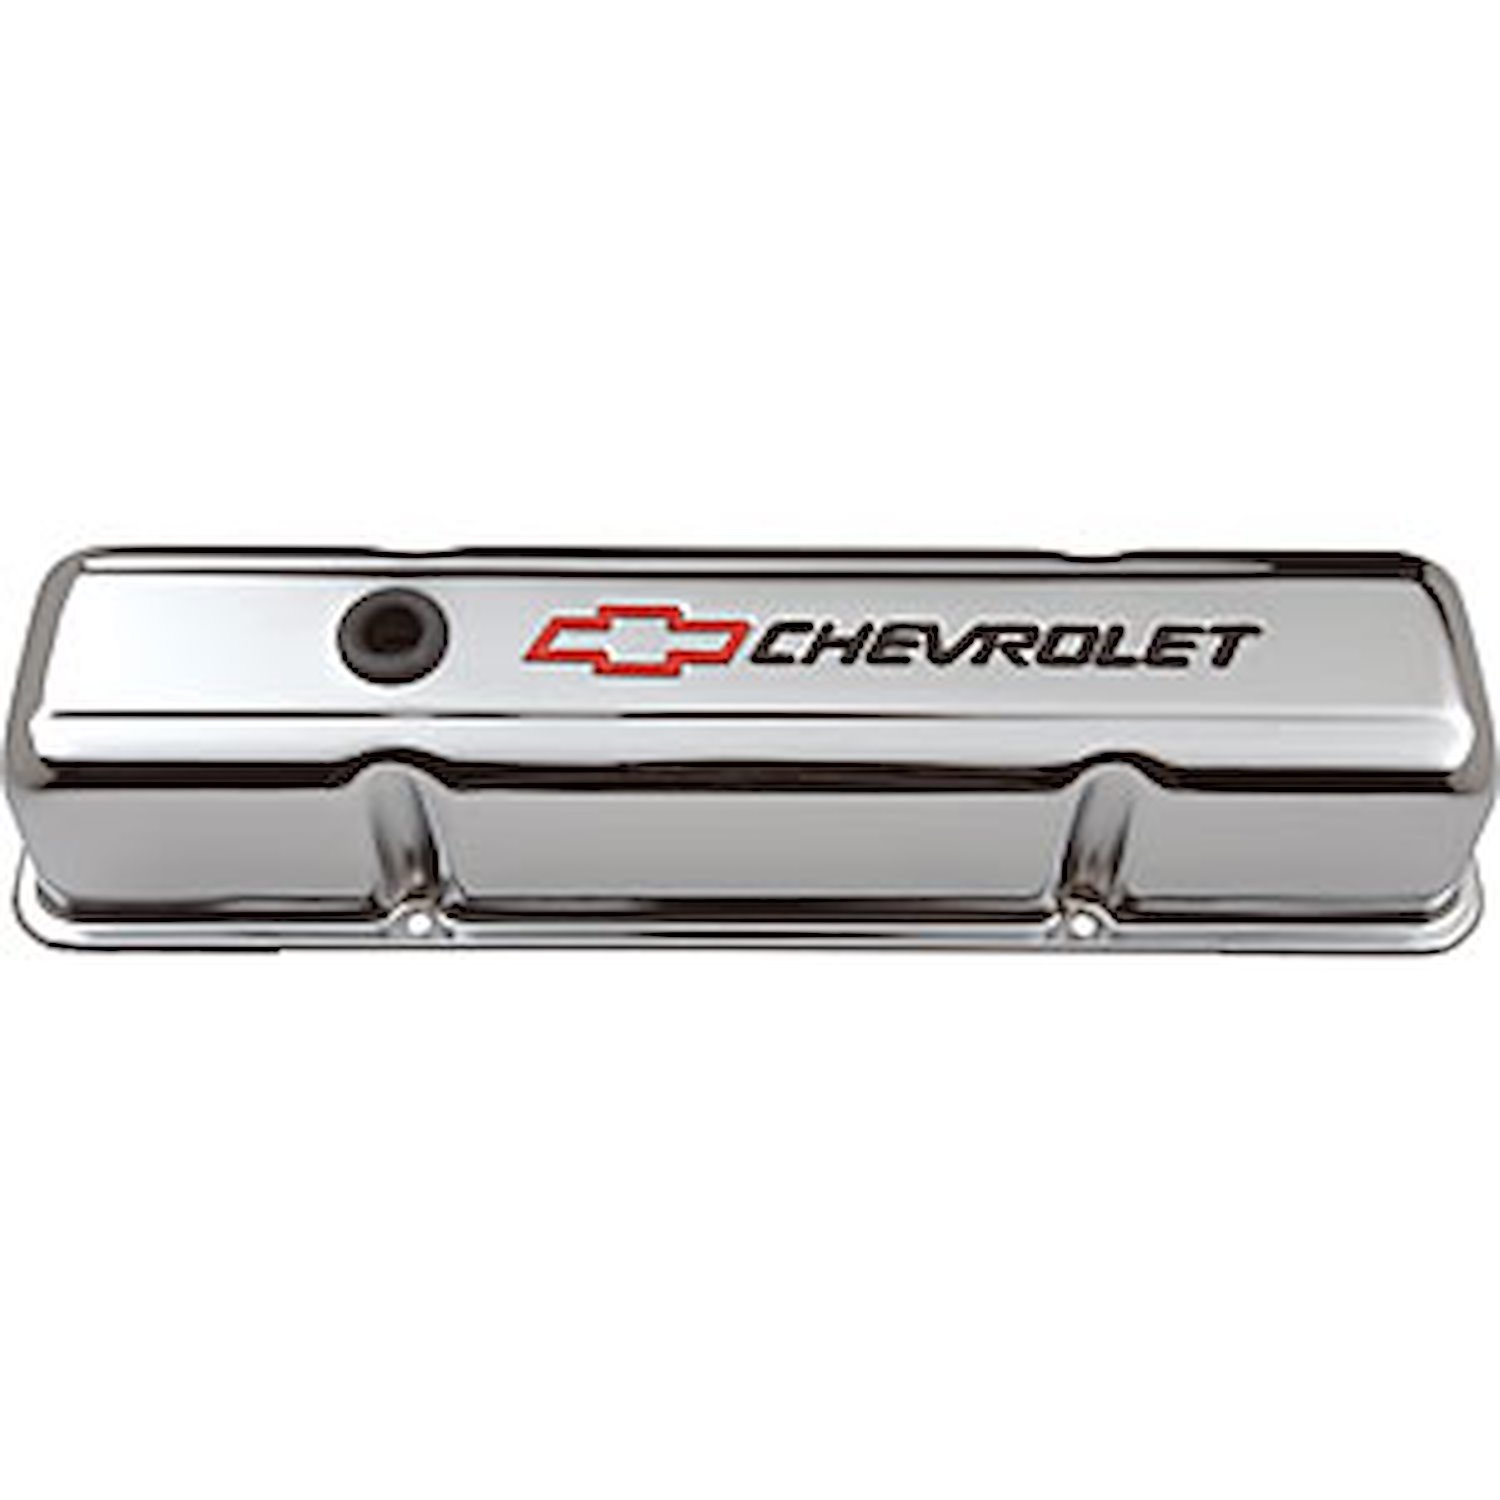 Chrome Tall Valve Covers with Red Bowtie & Black Chevrolet Emblem for 1958-1986 Small Block Chevy